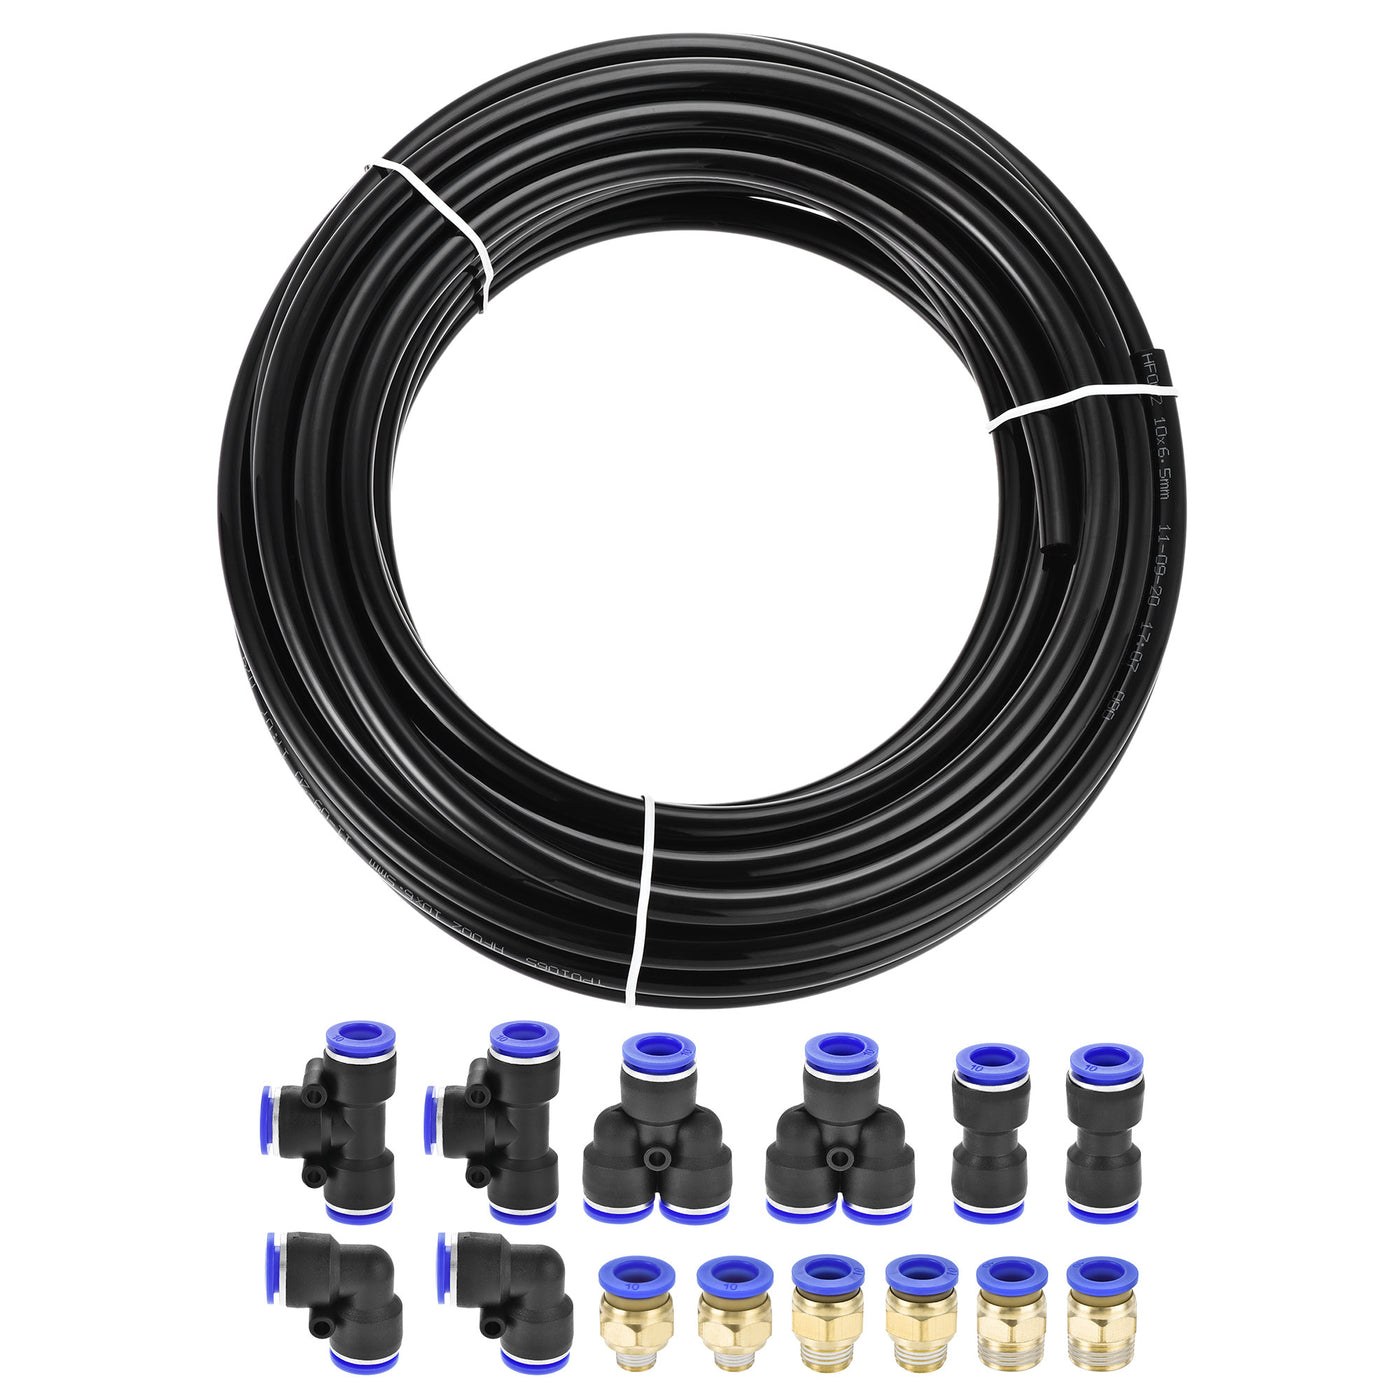 Uxcell Uxcell Pneumatic 10mm OD Polyurethane PU Air Hose Tubing Kit 10 Meters Blue with 14 Pcs Push to Connect Fittings